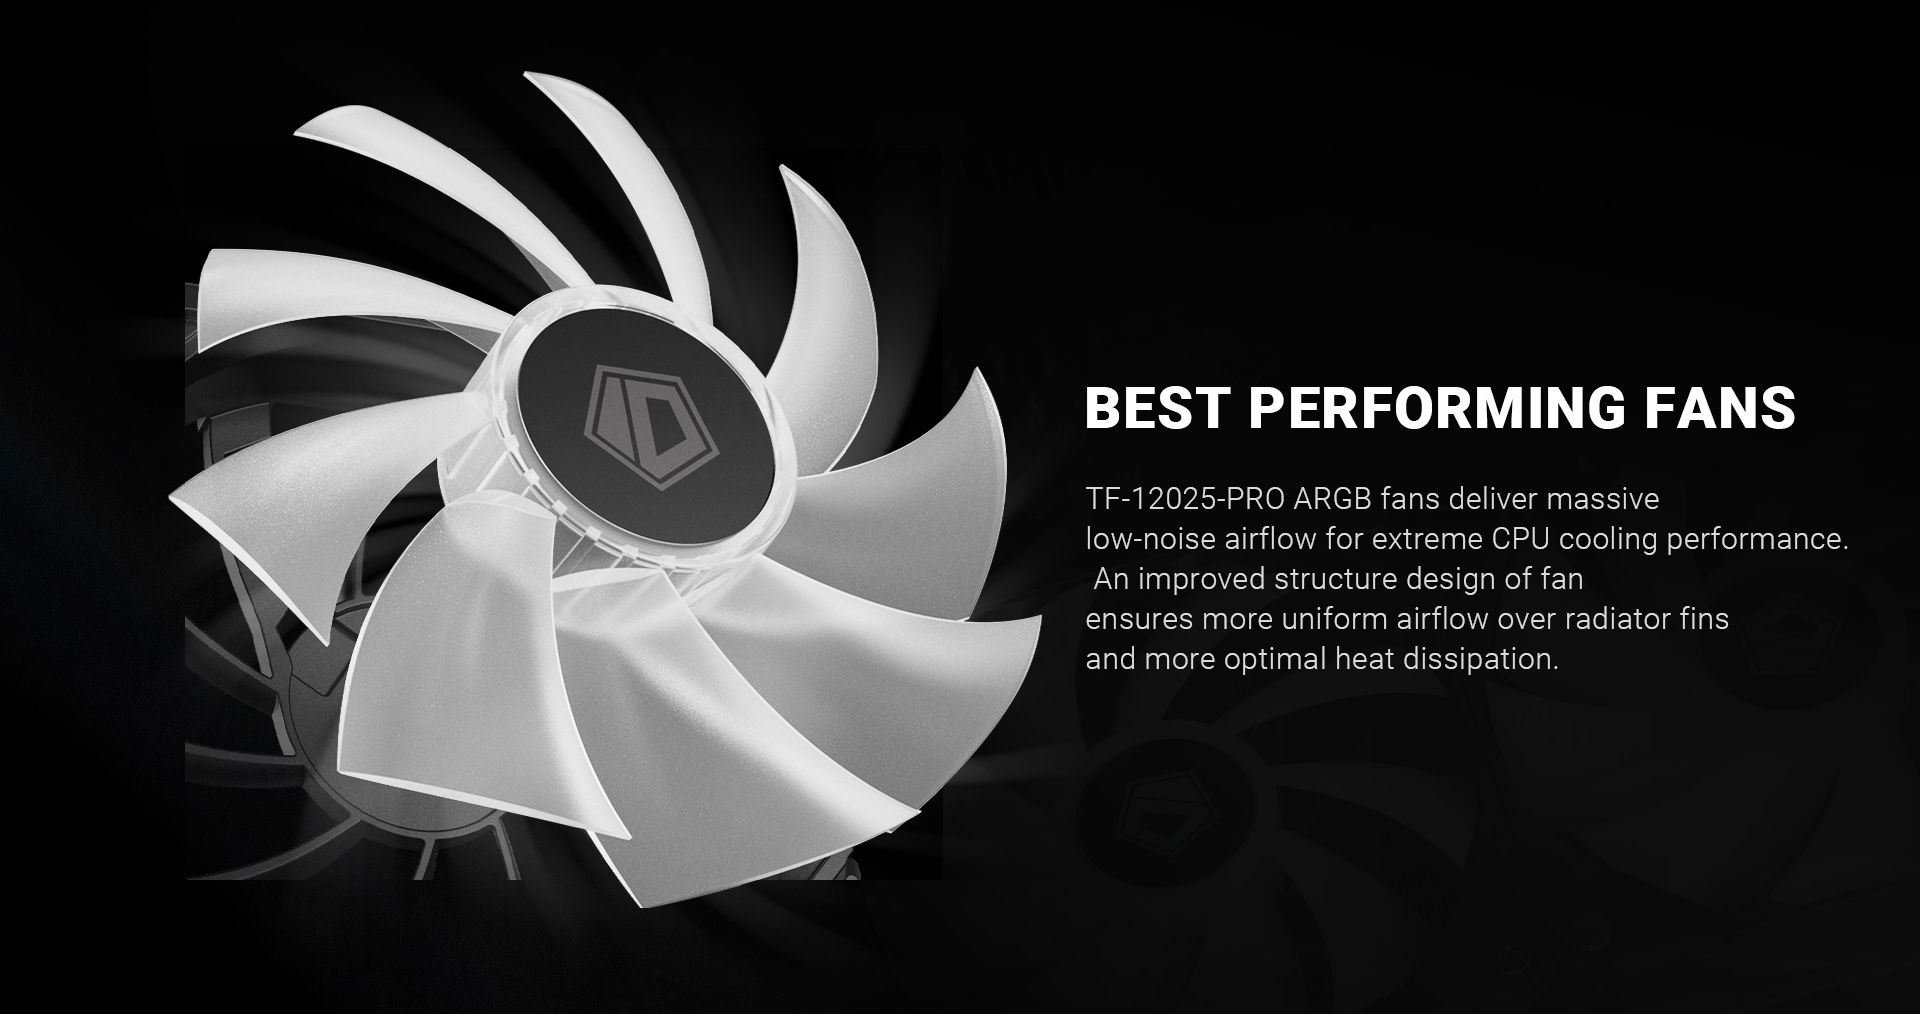 A large marketing image providing additional information about the product ID-COOLING ZoomFlow 240 XT V2 240mm ARGB AIO CPU Liquid Cooler - Black - Additional alt info not provided